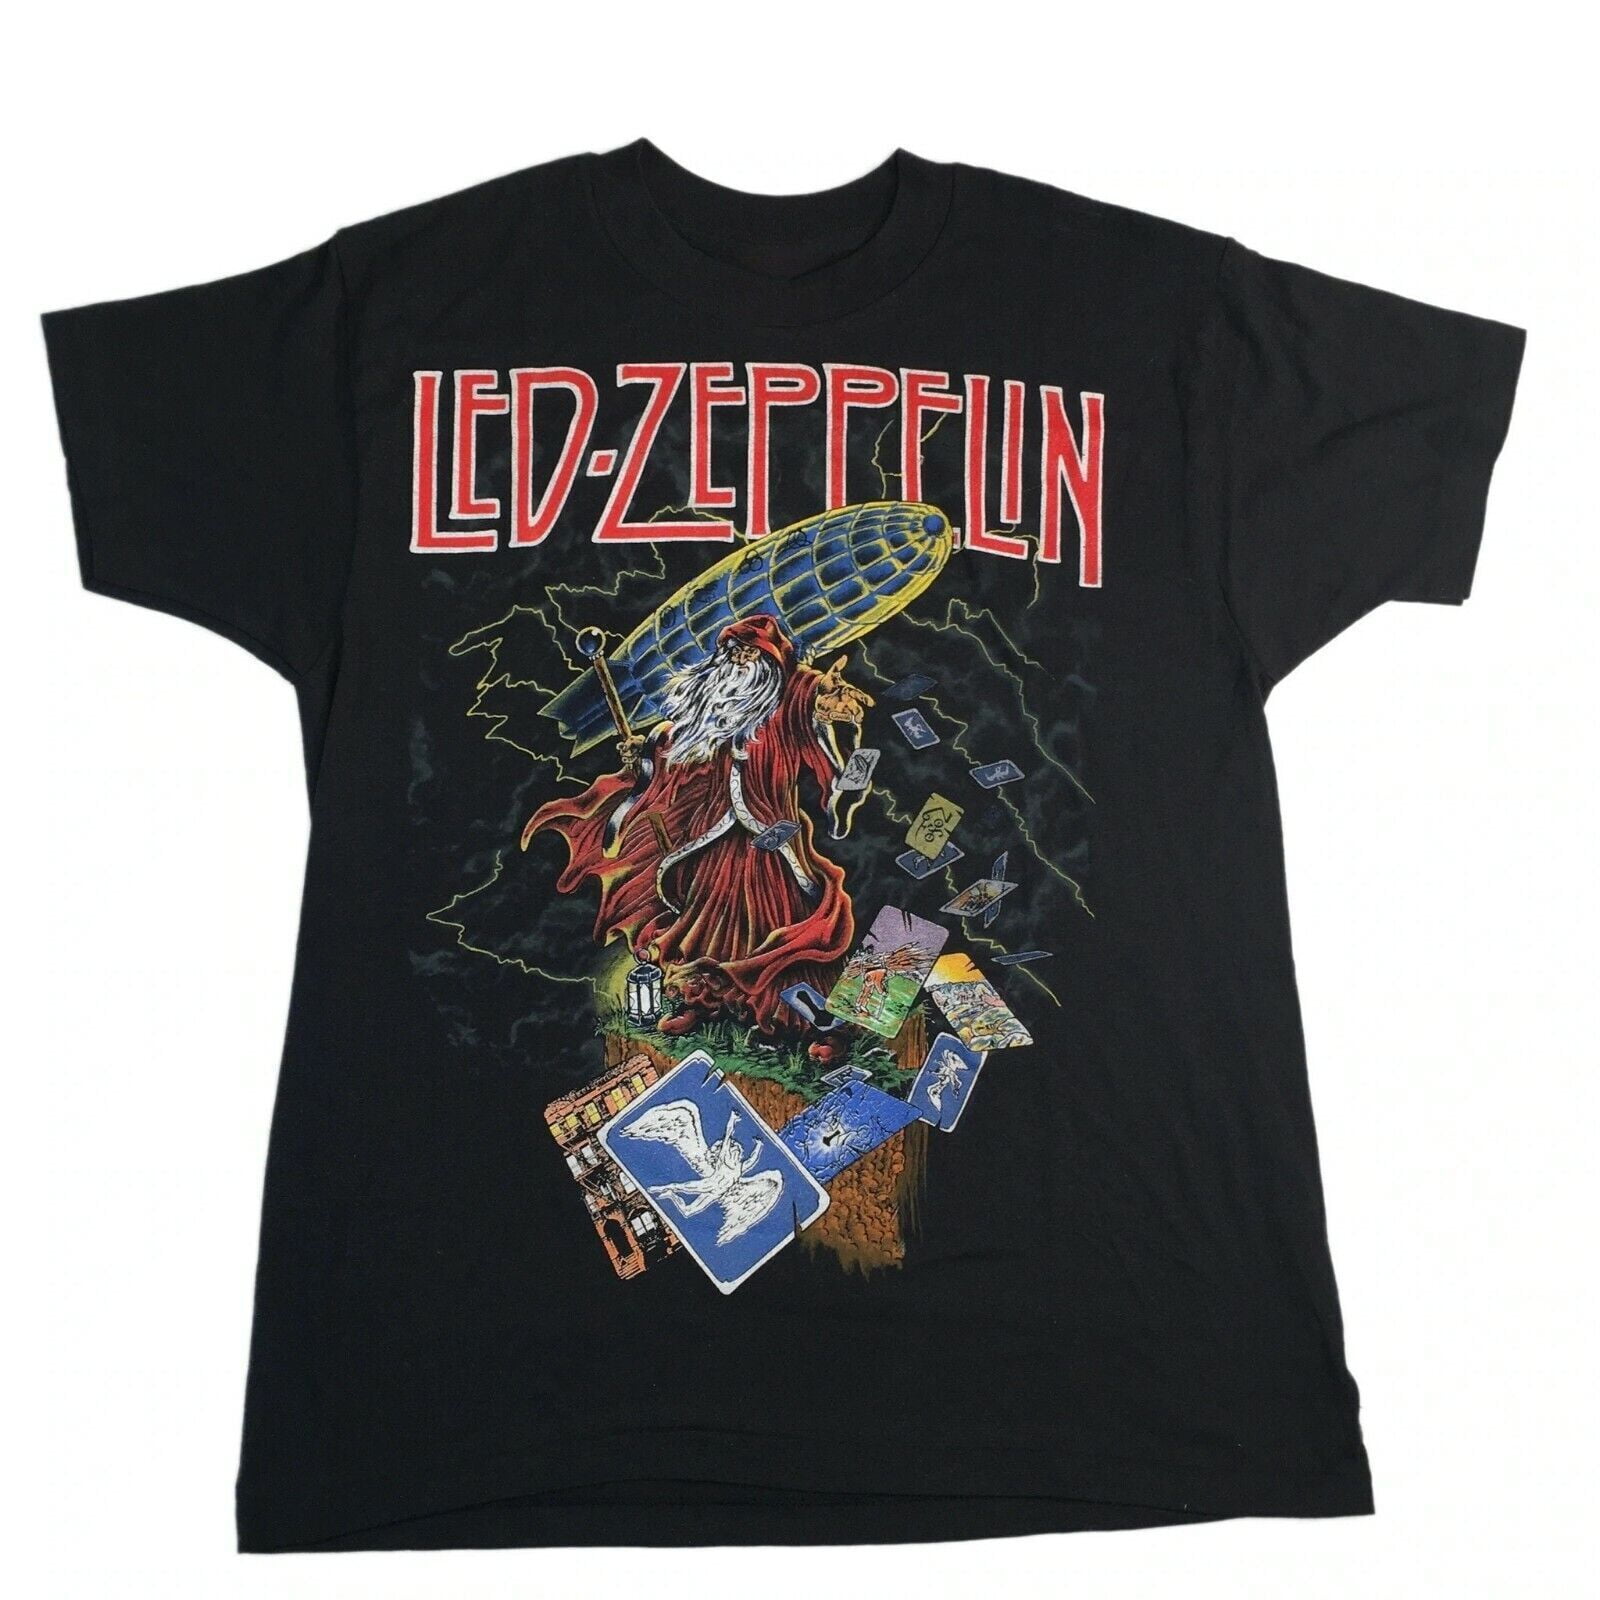 Led-Zeppelin The Hermit ZoSo Wizard 1988 Vintage T-Shirt S-4XL ...